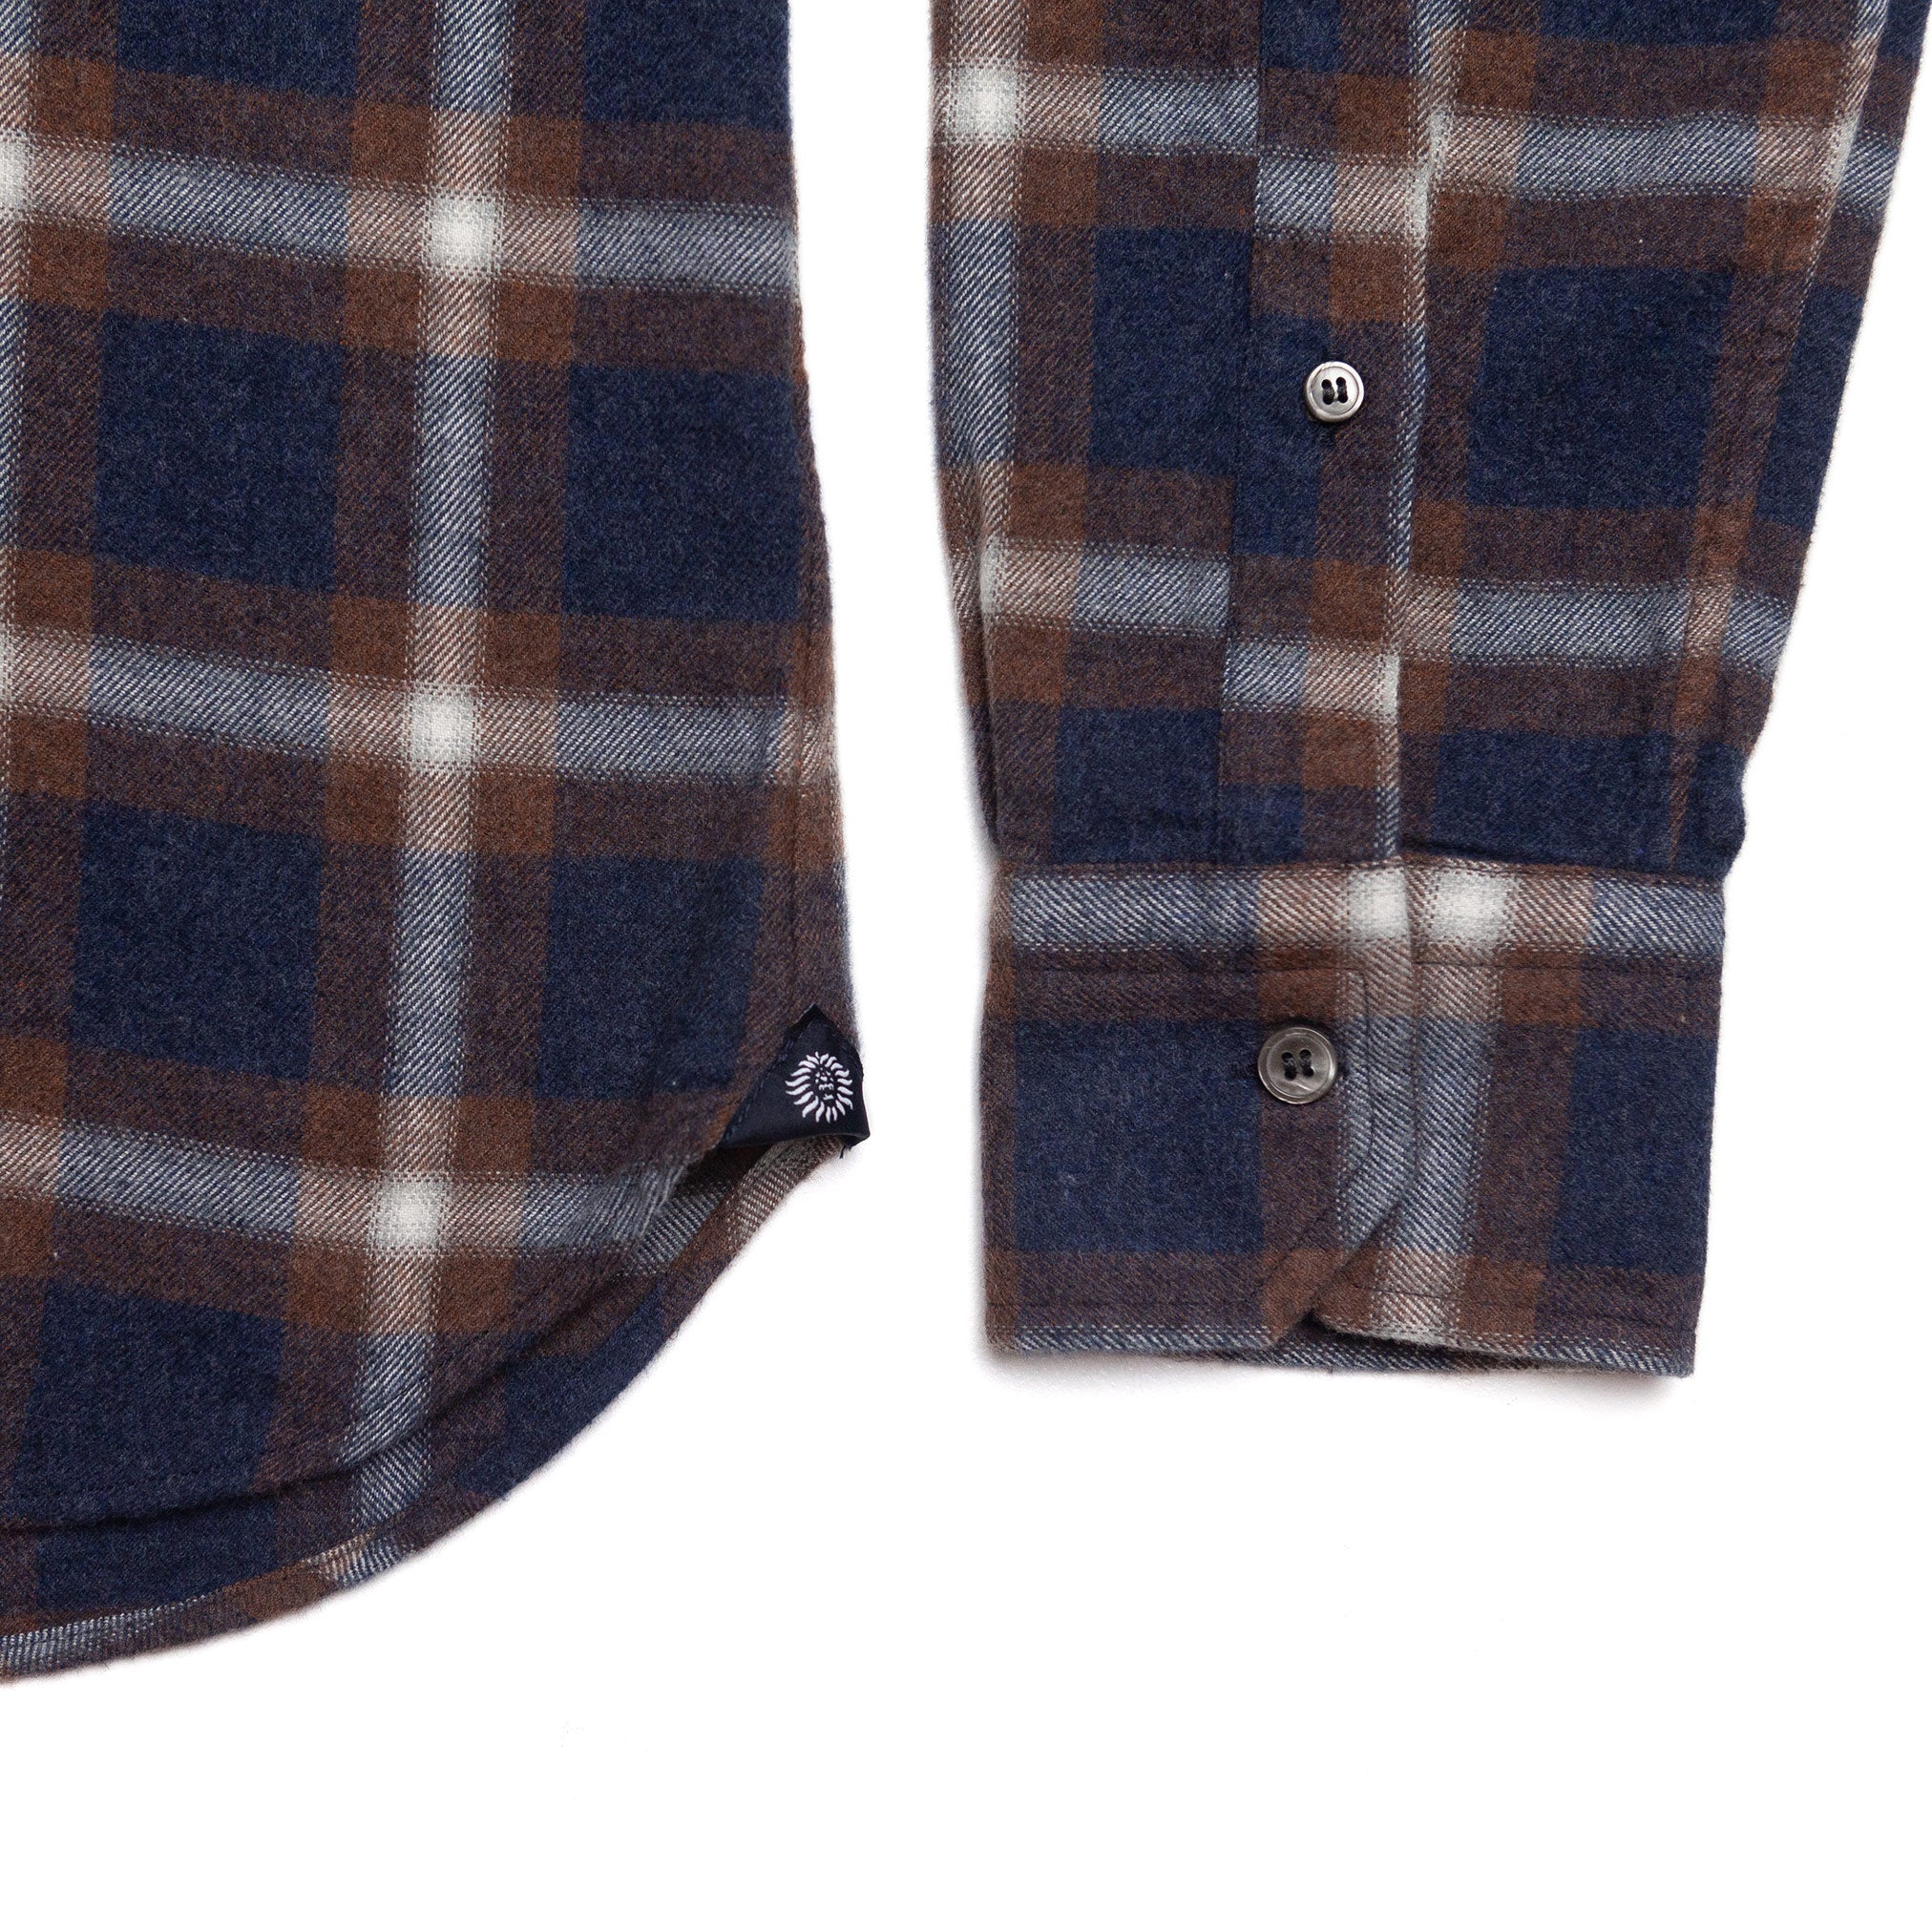 Brushed Flannel Rust & Navy Plaid Shirt